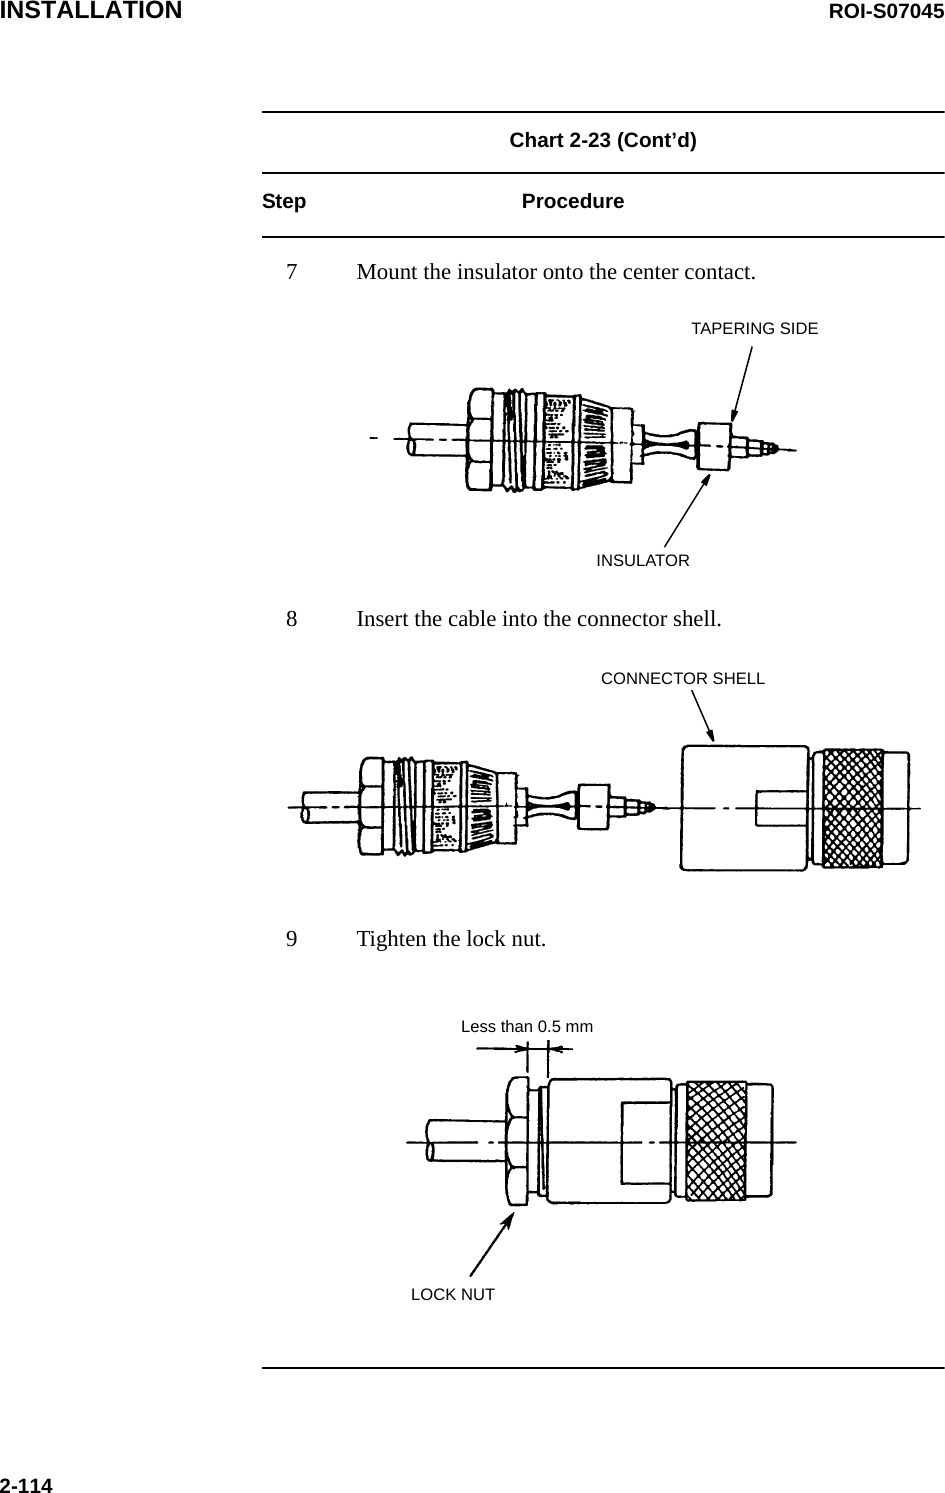 INSTALLATION ROI-S070452-114Chart 2-23 (Cont’d) Step Procedure7 Mount the insulator onto the center contact.8 Insert the cable into the connector shell.9 Tighten the lock nut.TAPERING SIDEINSULATORCONNECTOR SHELLLOCK NUTLess than 0.5 mm